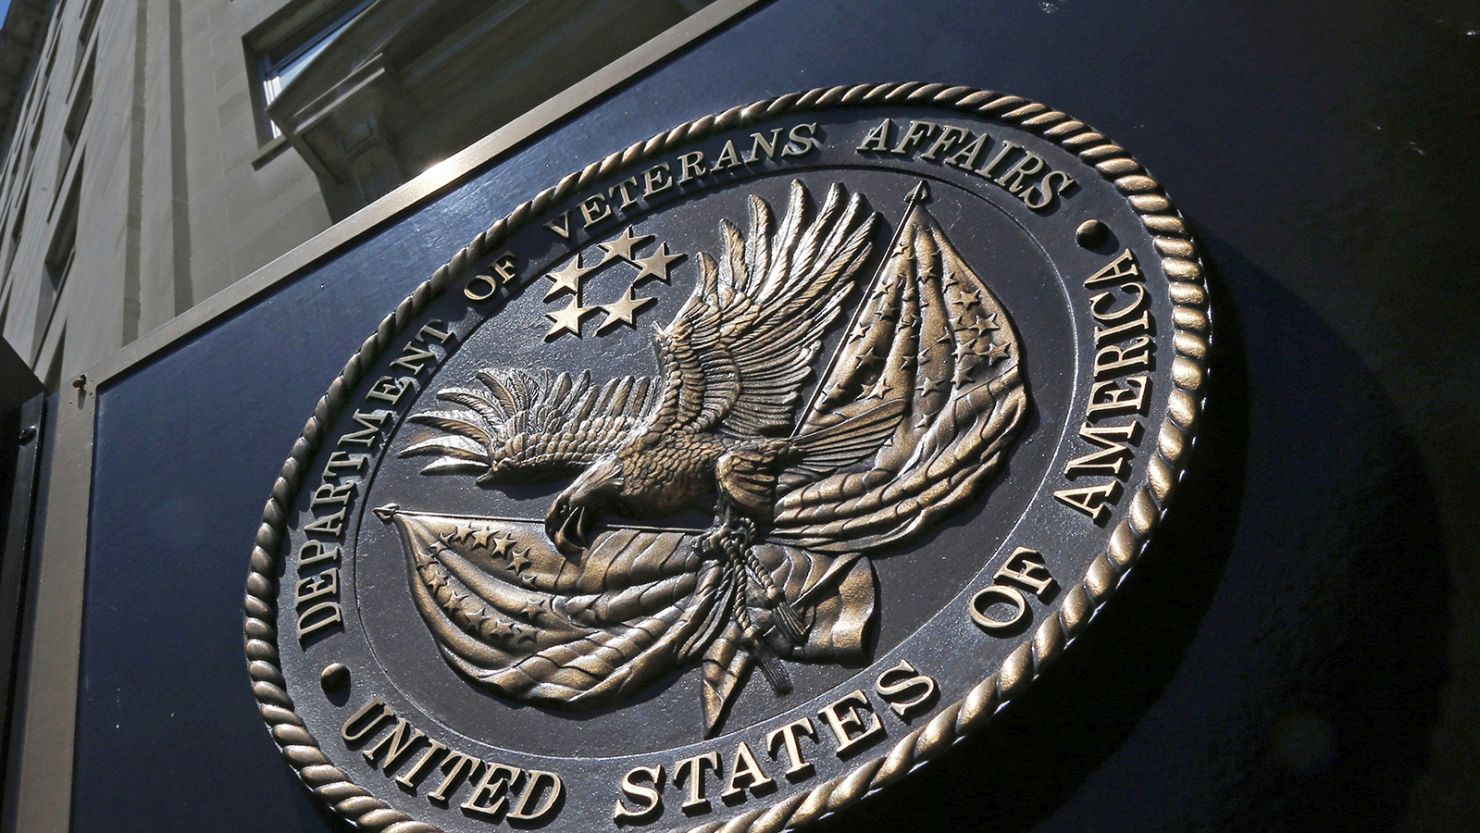 A seal is displayed on the front of the Veterans Affairs Department building in Washington in June 2013.